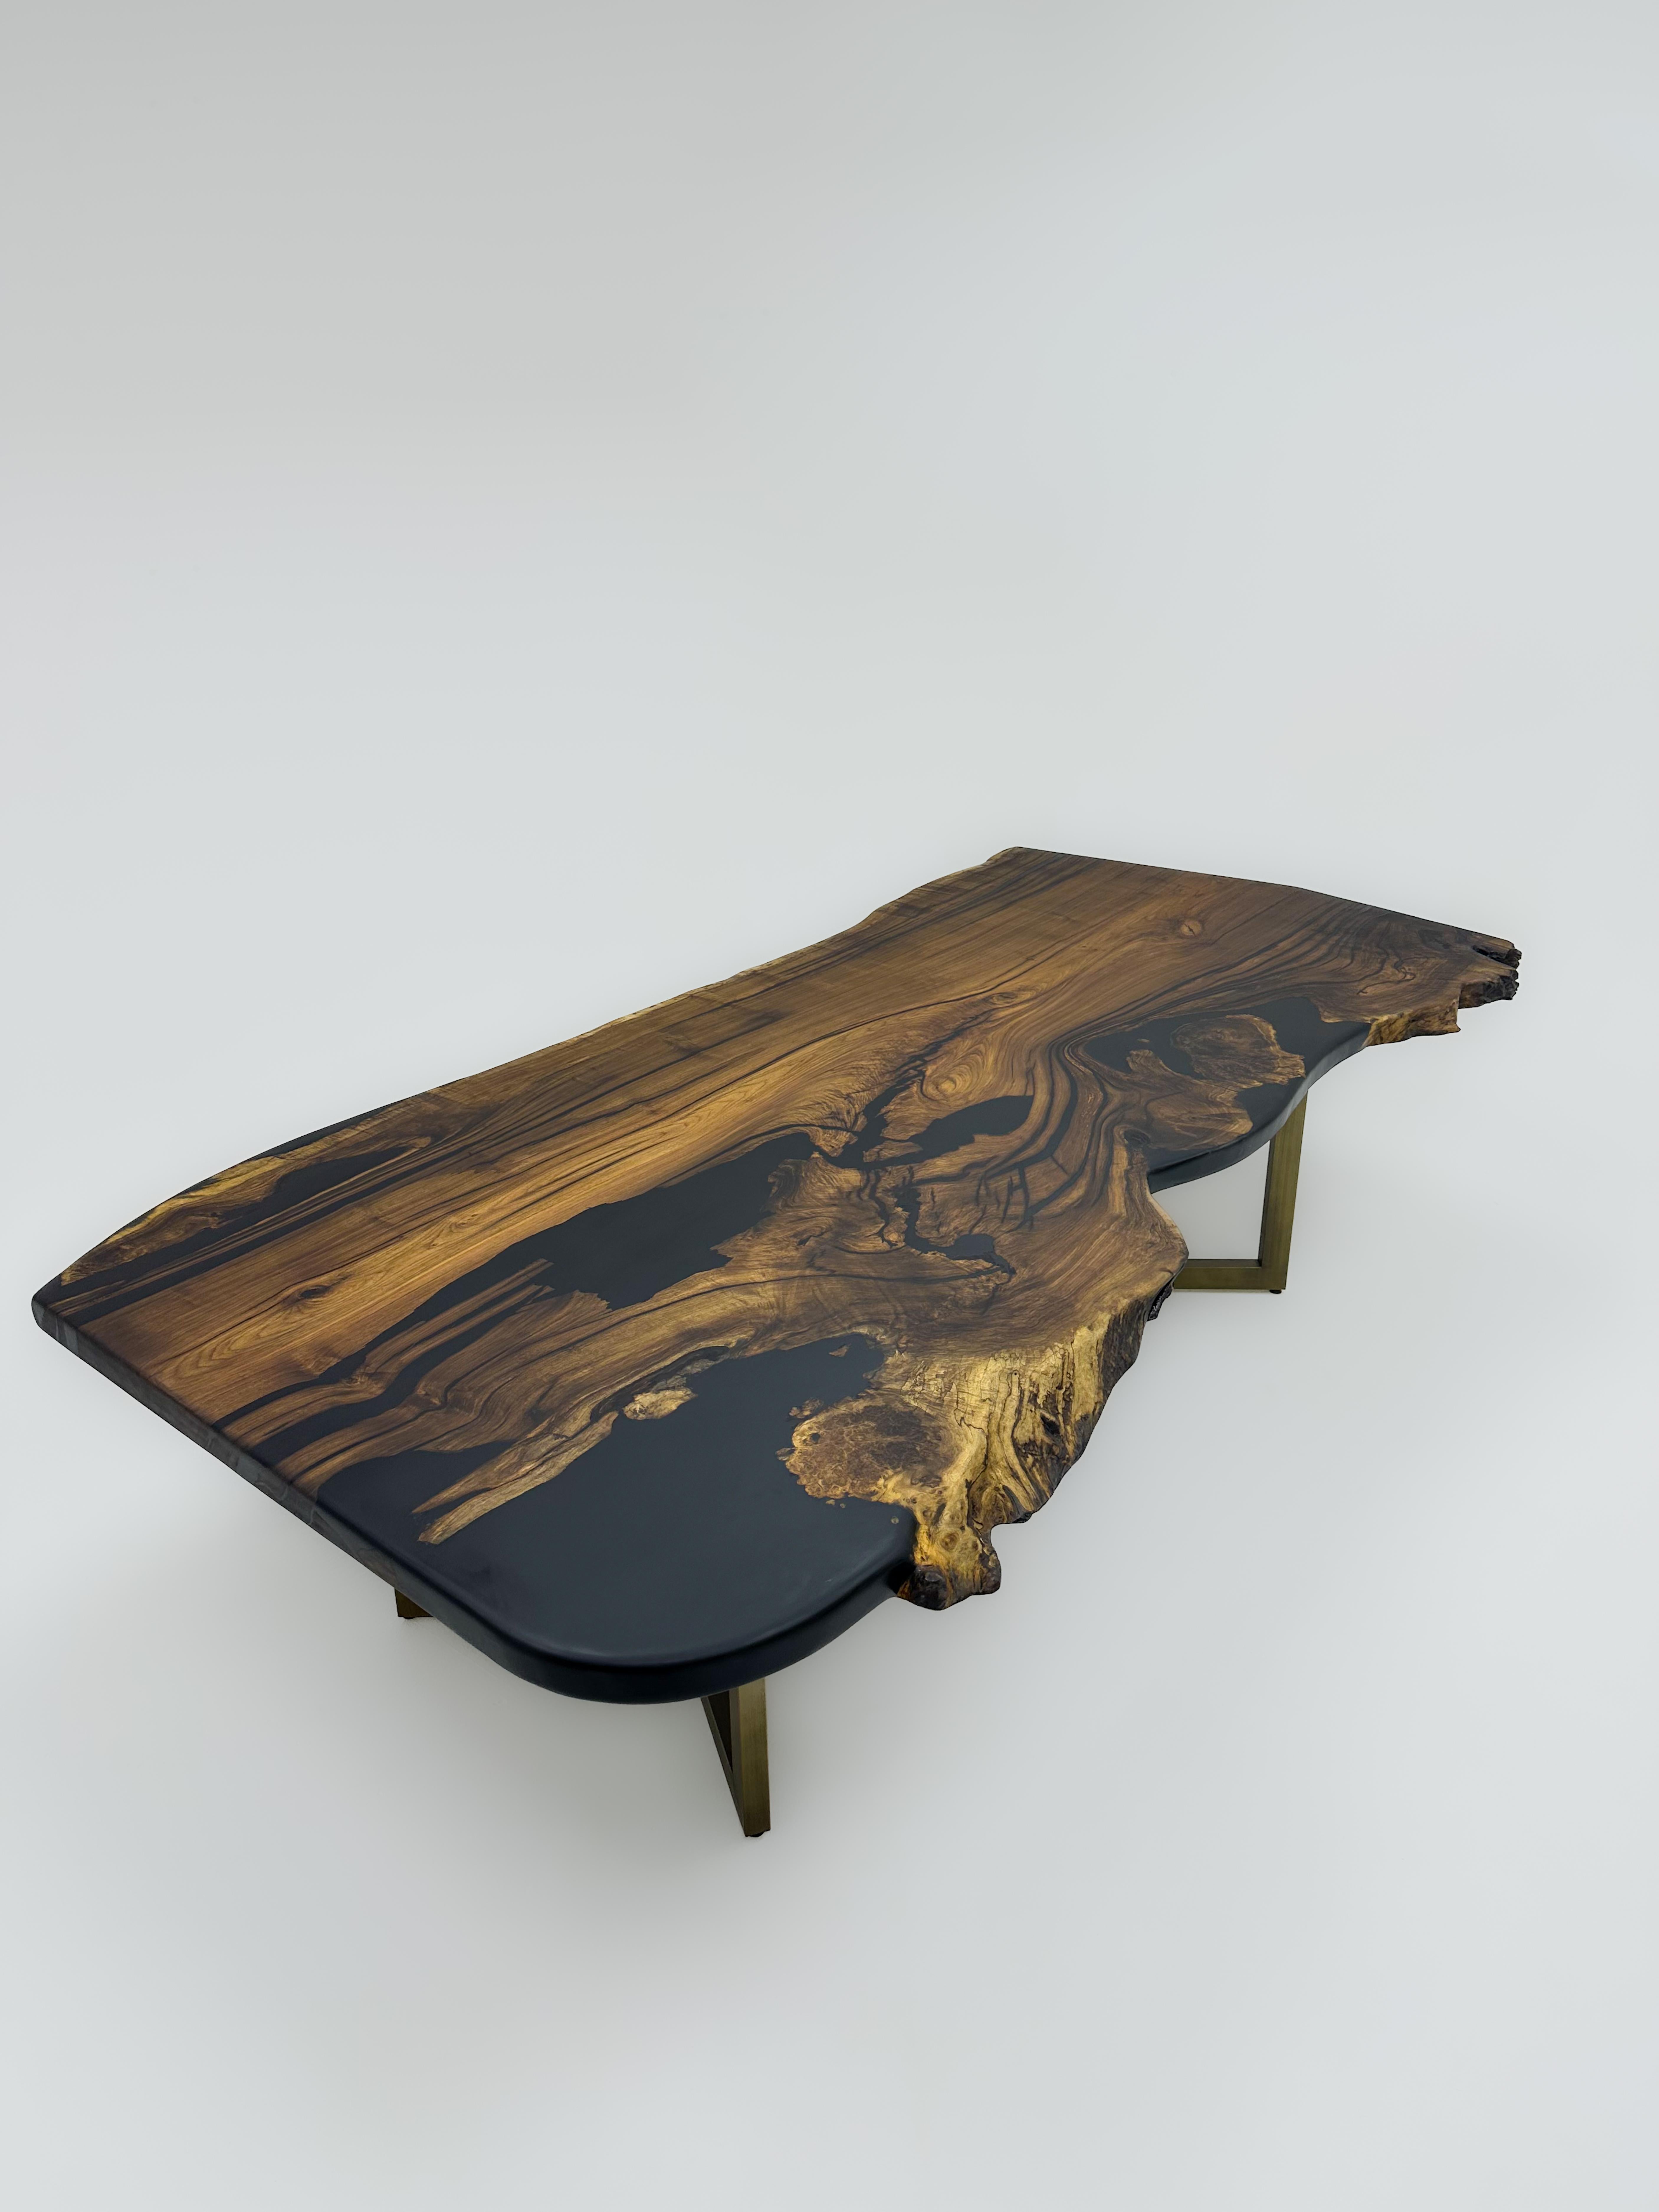 Contemporary Live Edge Walnut Wooden Dining Table For Sale